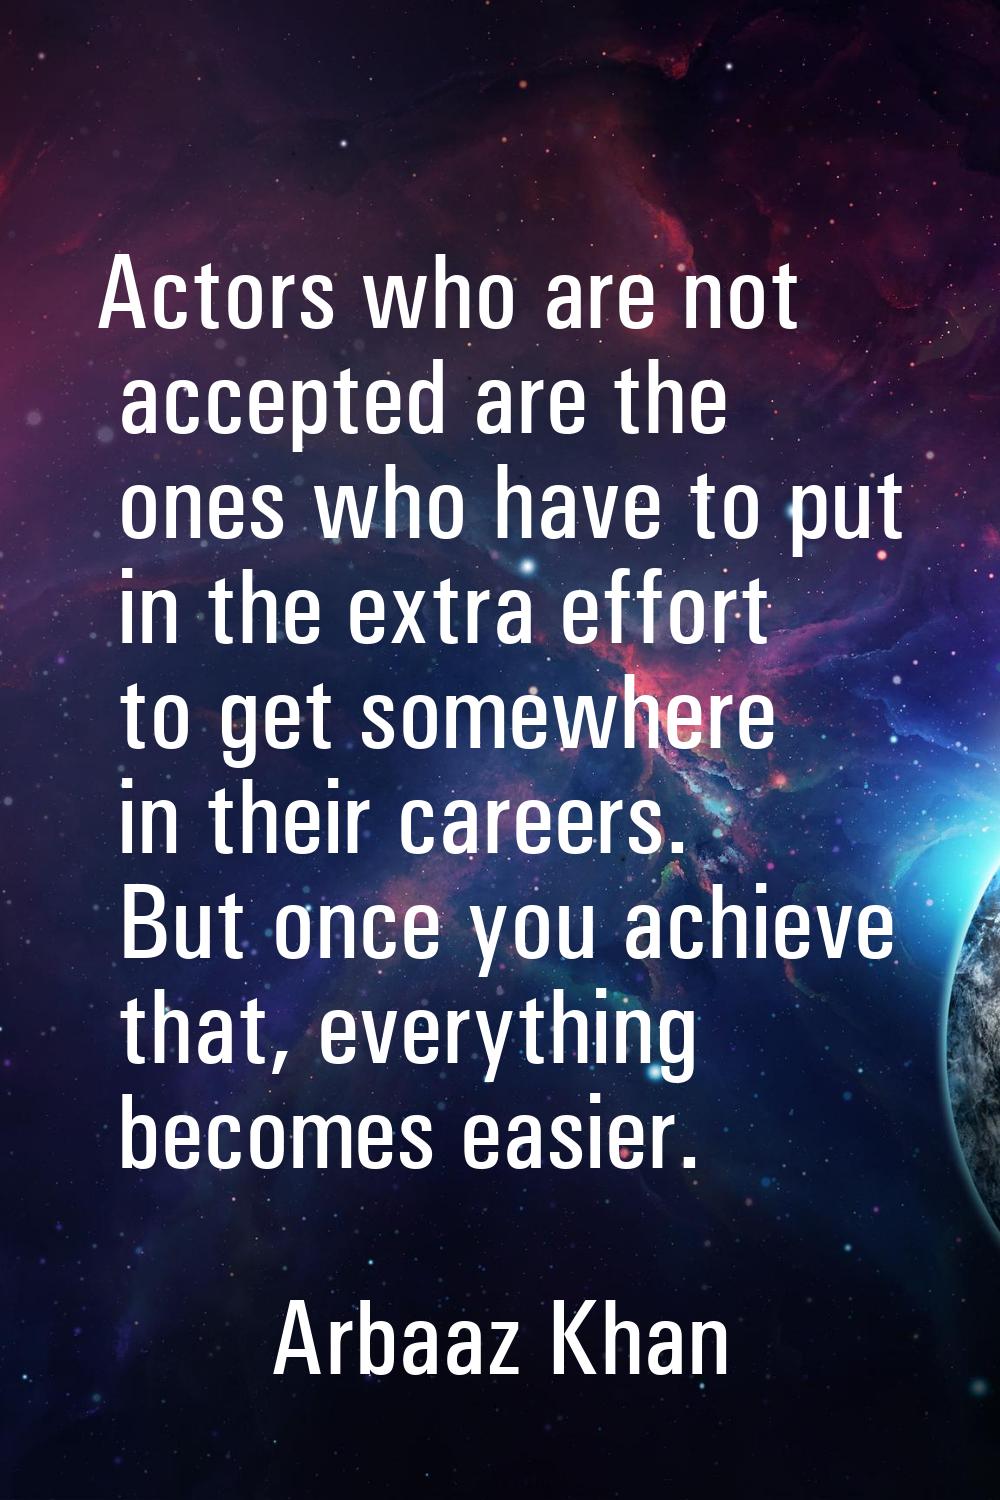 Actors who are not accepted are the ones who have to put in the extra effort to get somewhere in th